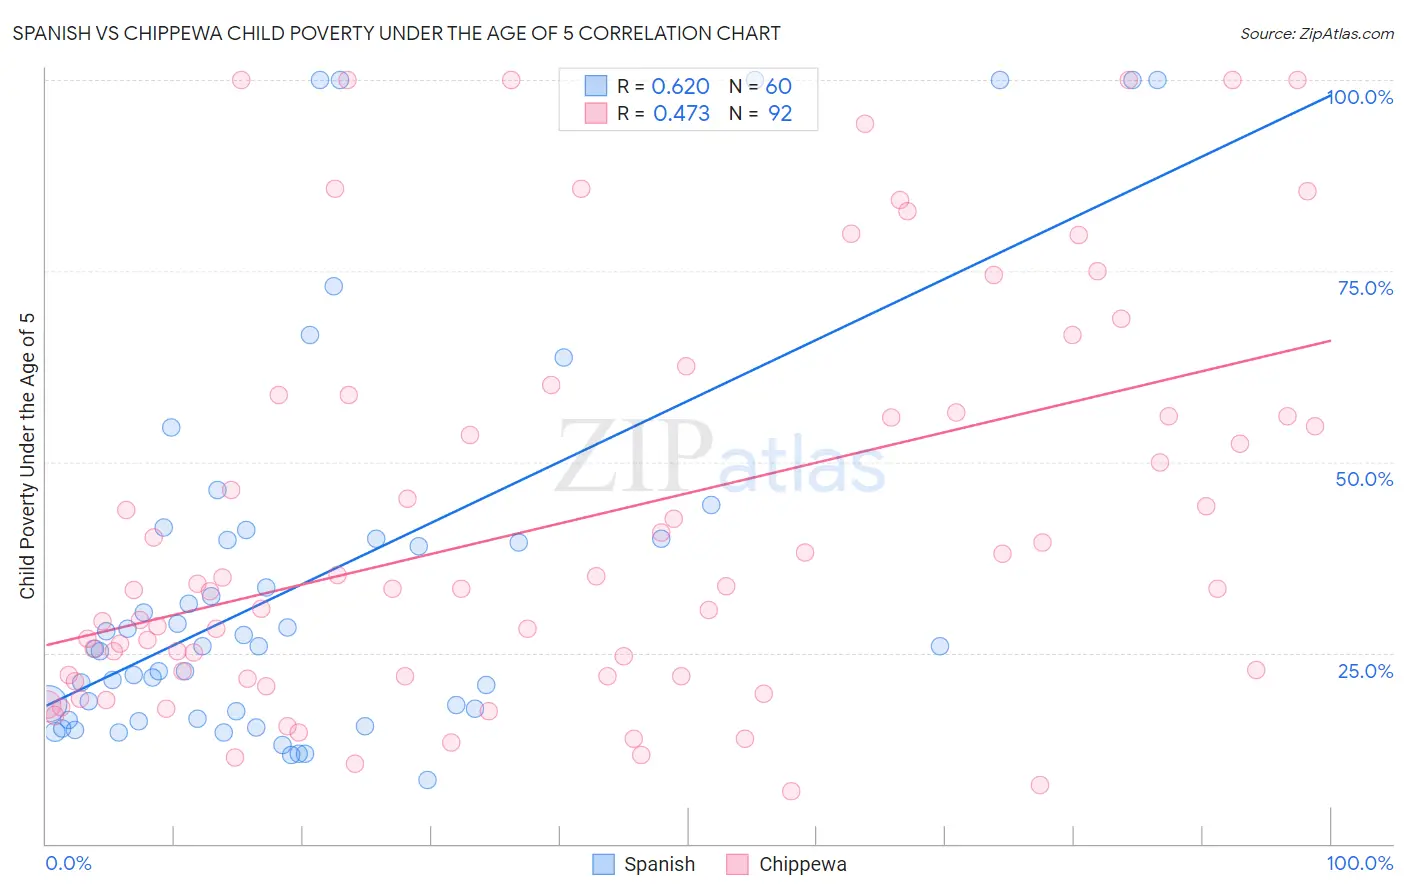 Spanish vs Chippewa Child Poverty Under the Age of 5